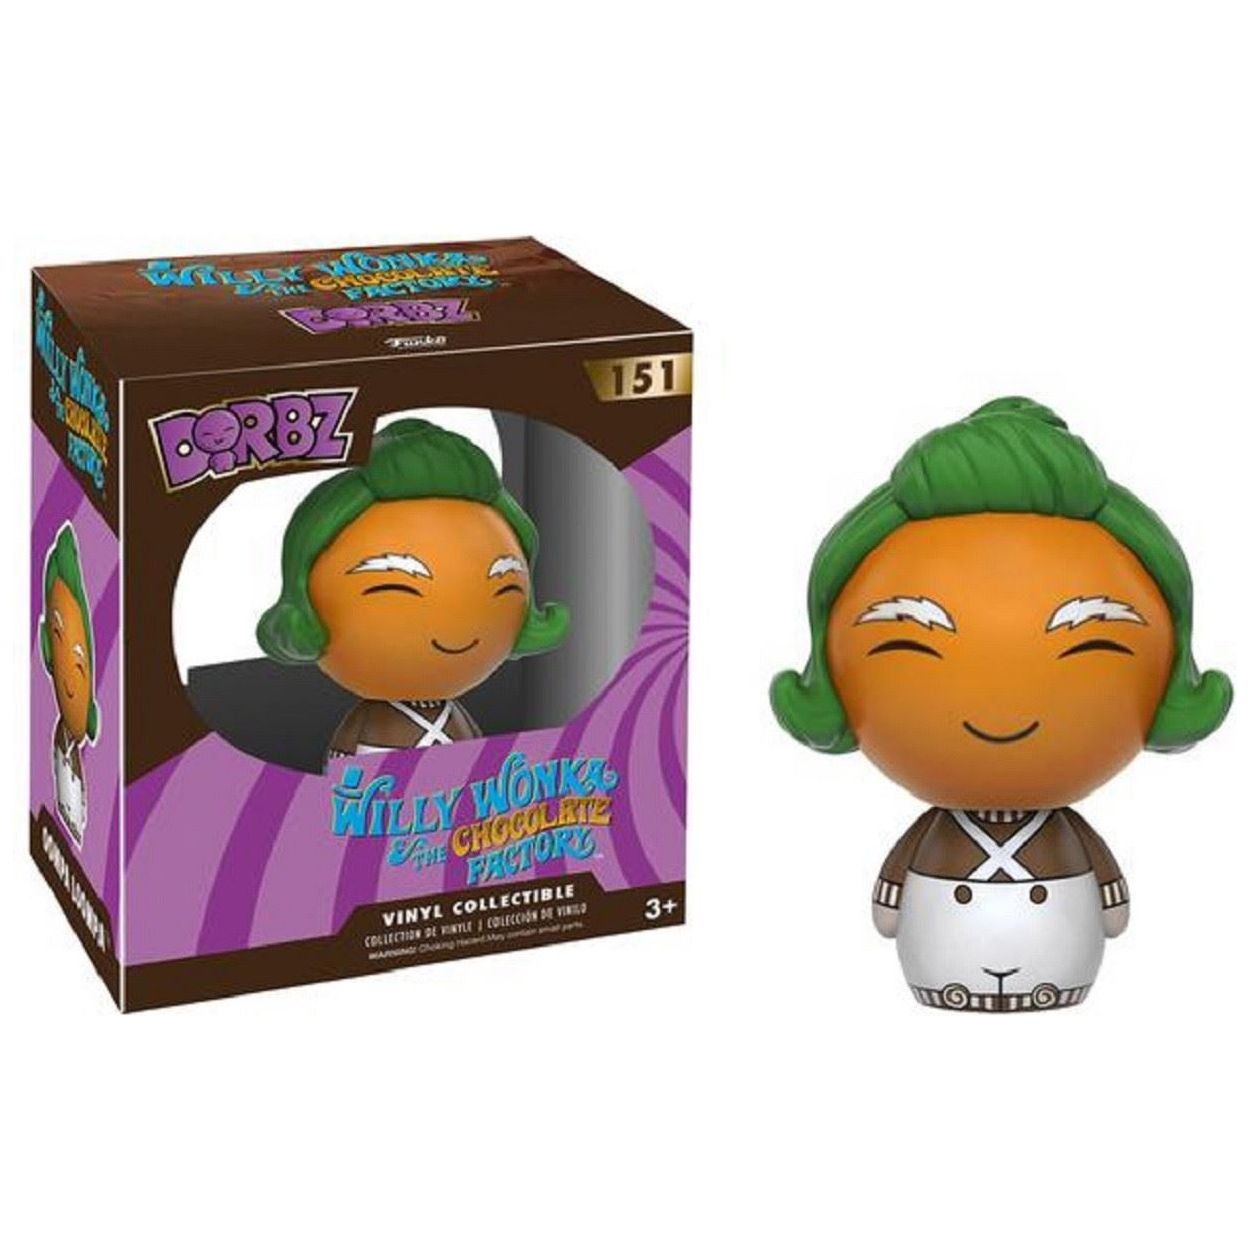 Funko Dorbz Willy Wonka The Chocolate Factory Oompa Loompa Vinyl Collectible #15 - Partytoyz Inc